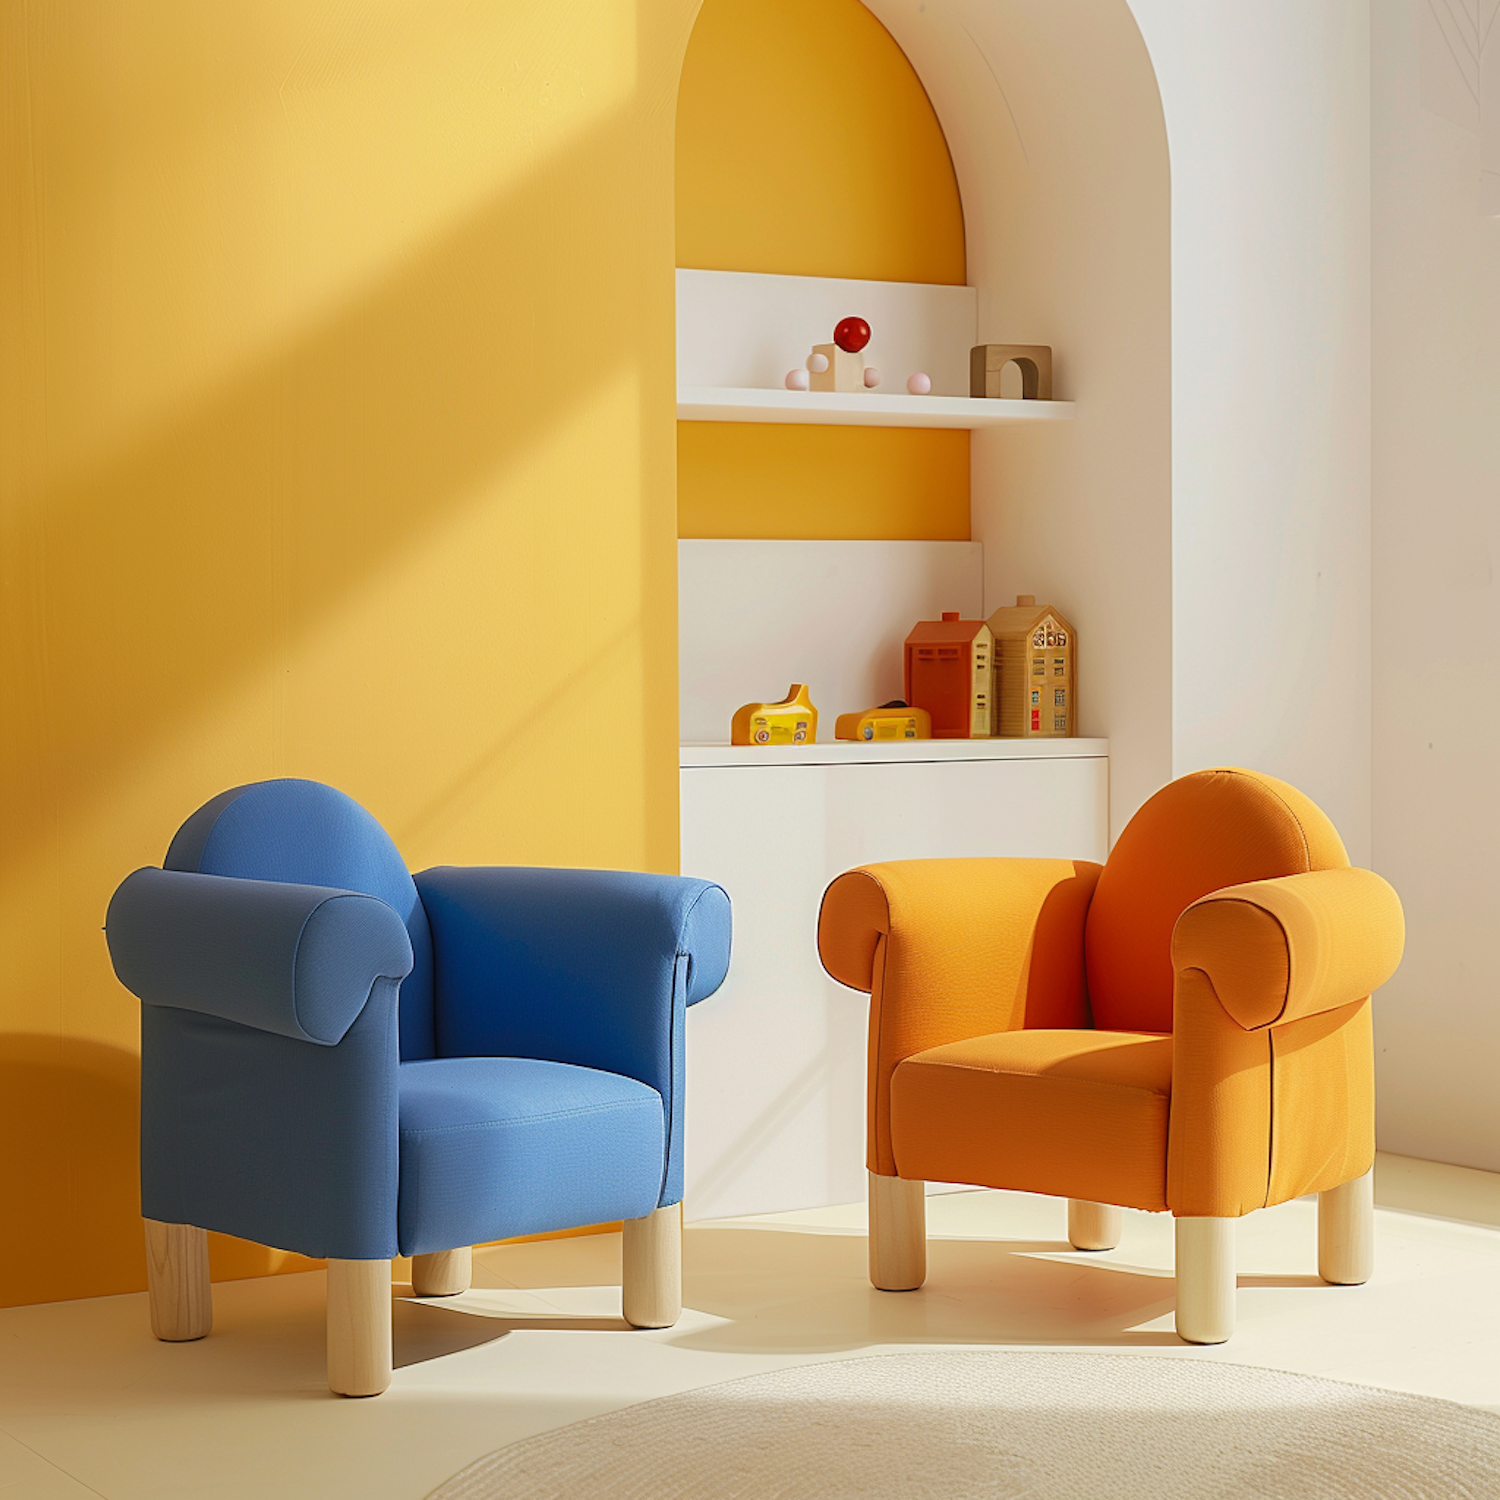 Playful Interior with Colorful Armchairs